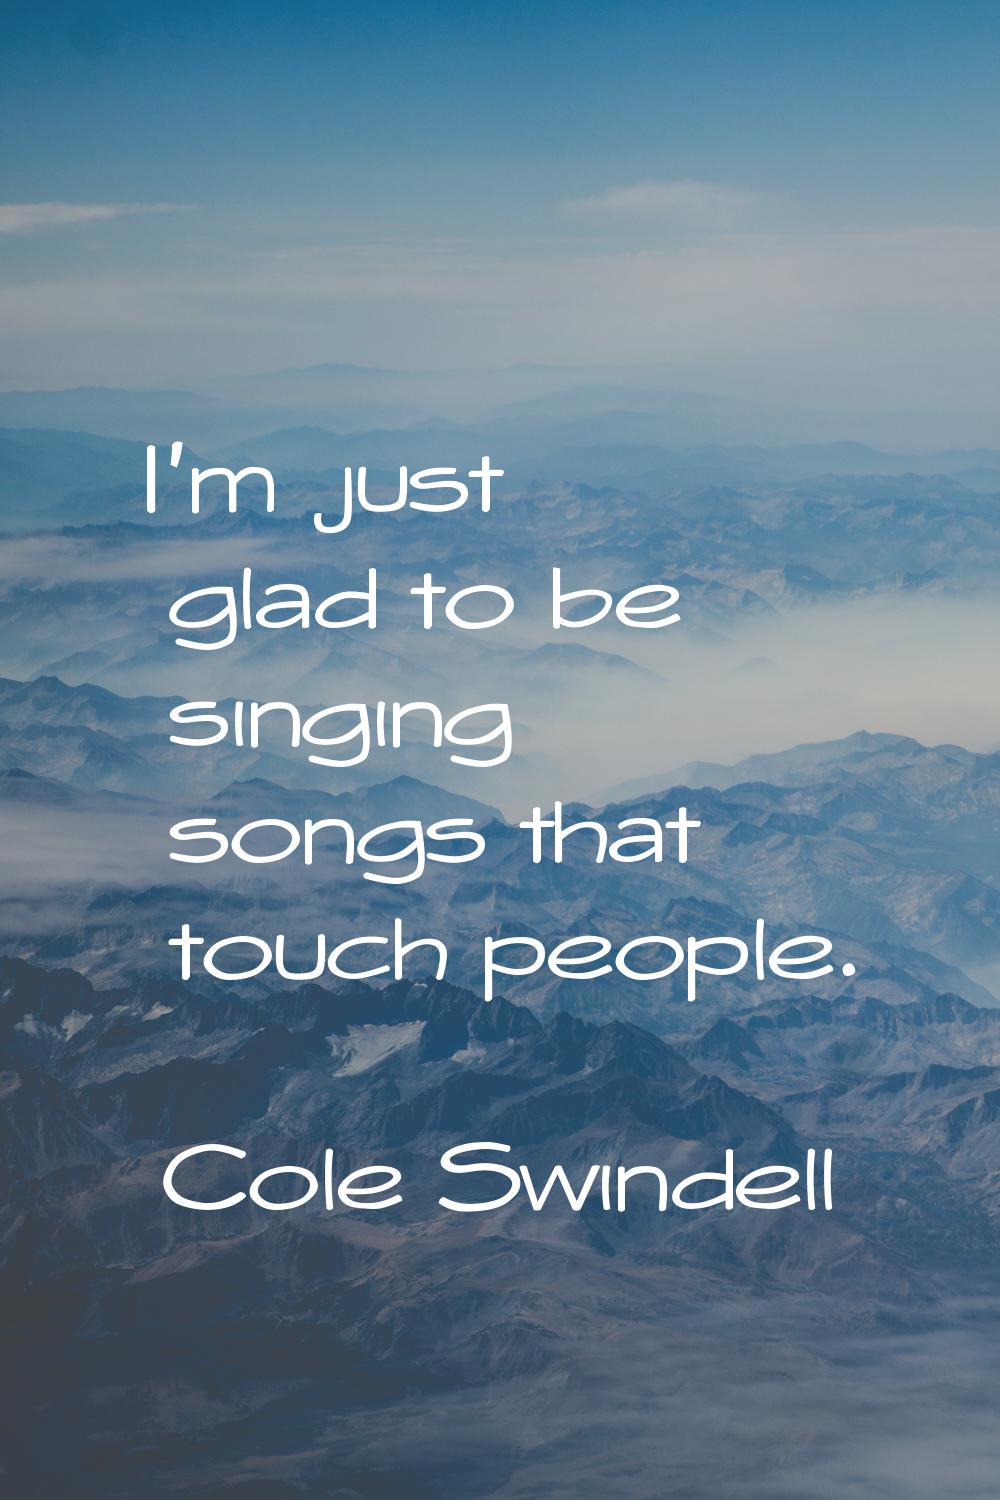 I'm just glad to be singing songs that touch people.